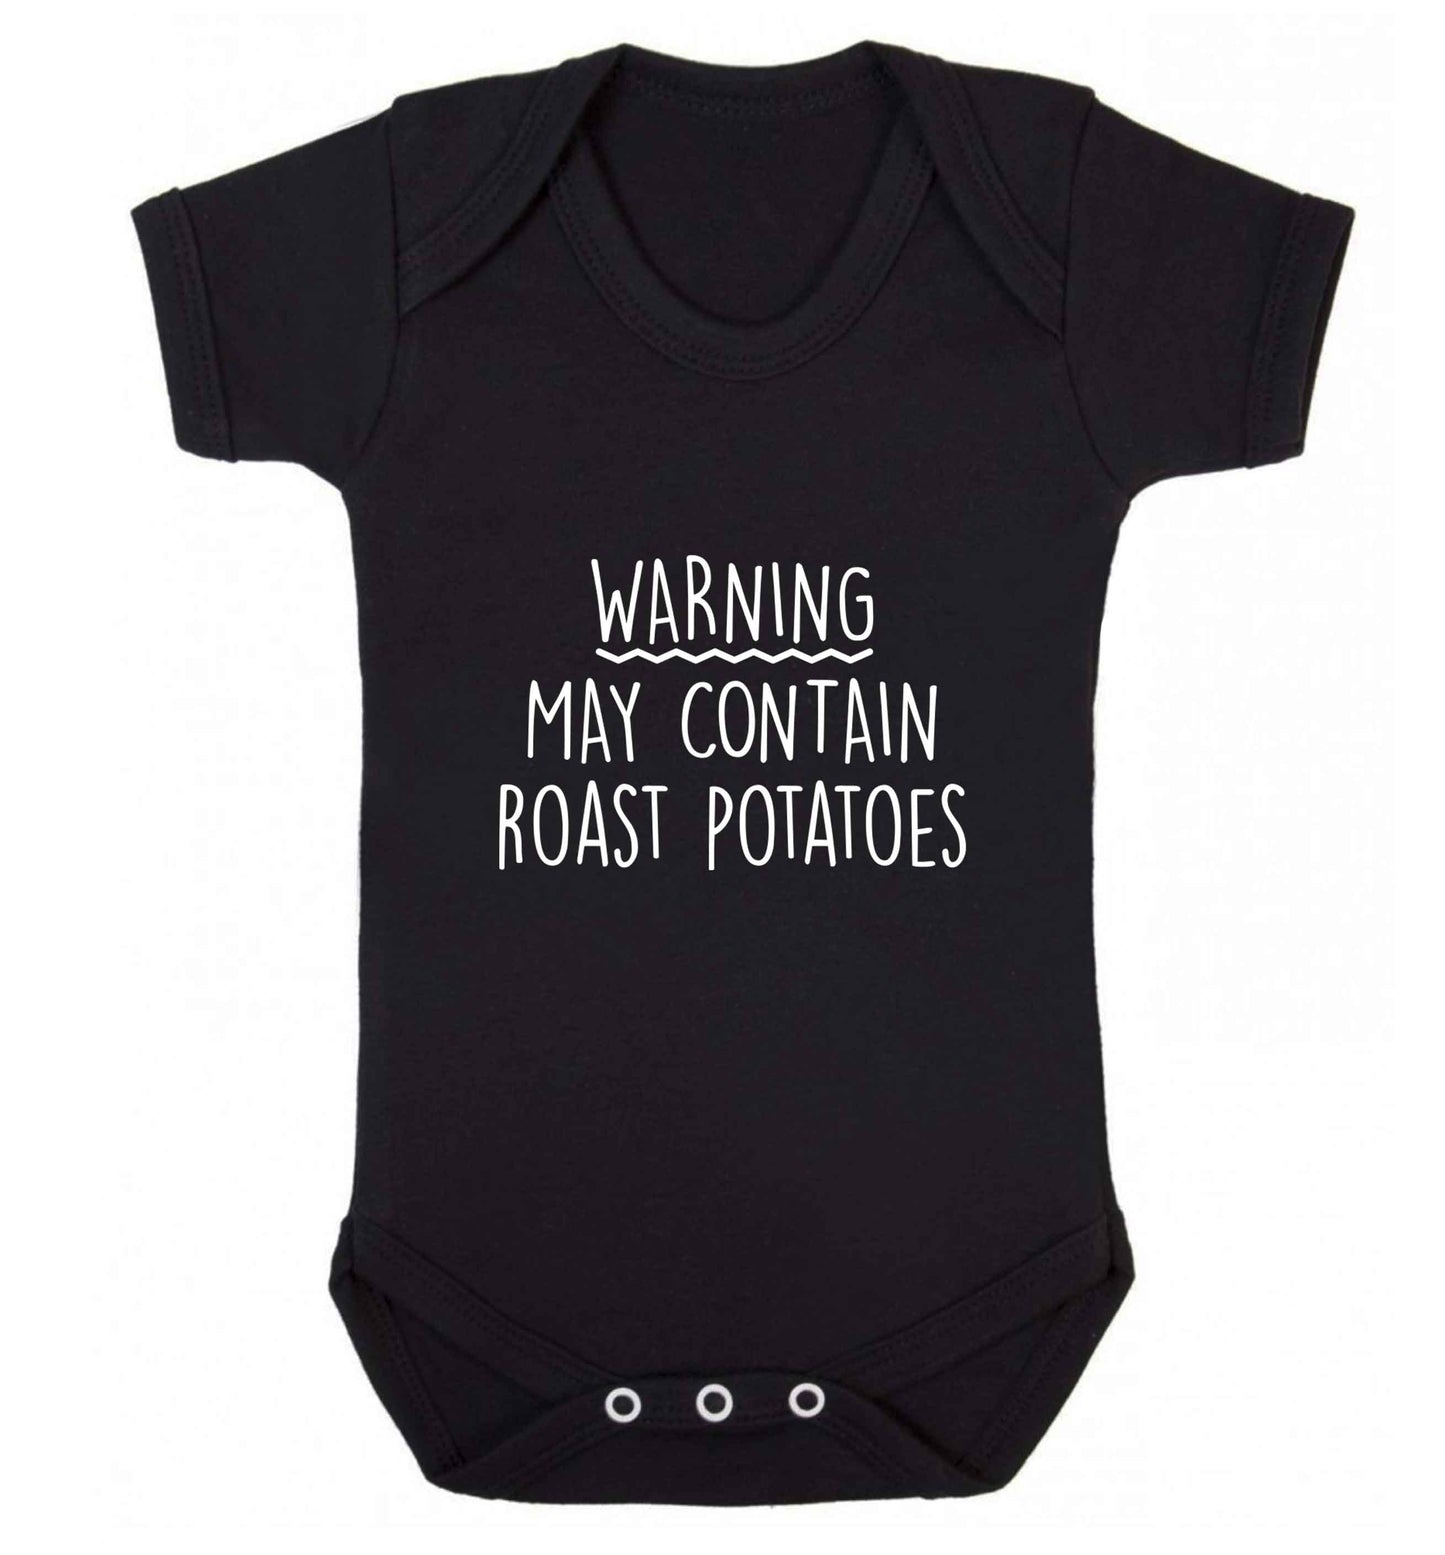 Warning may containg roast potatoes baby vest black 18-24 months